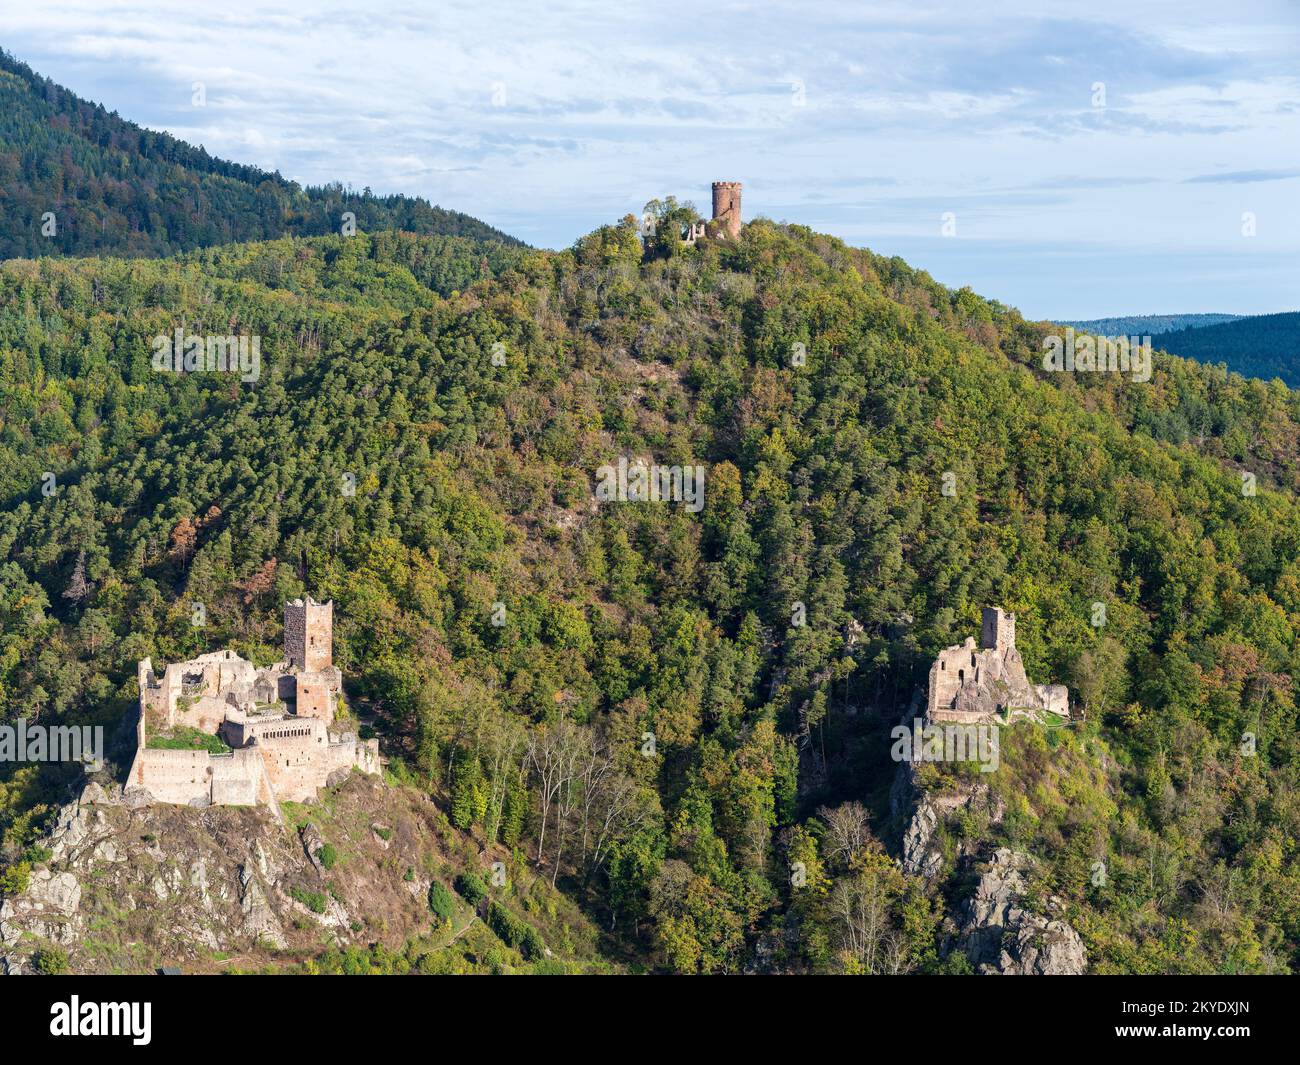 AERIAL VIEW. The Castles of Ribeauvillé; (left to right) Saint-Ulrich, Haut-Ribeaupierre and Girsberg. Haut-Rhin, Alsace, Grand Est, France. Stock Photo